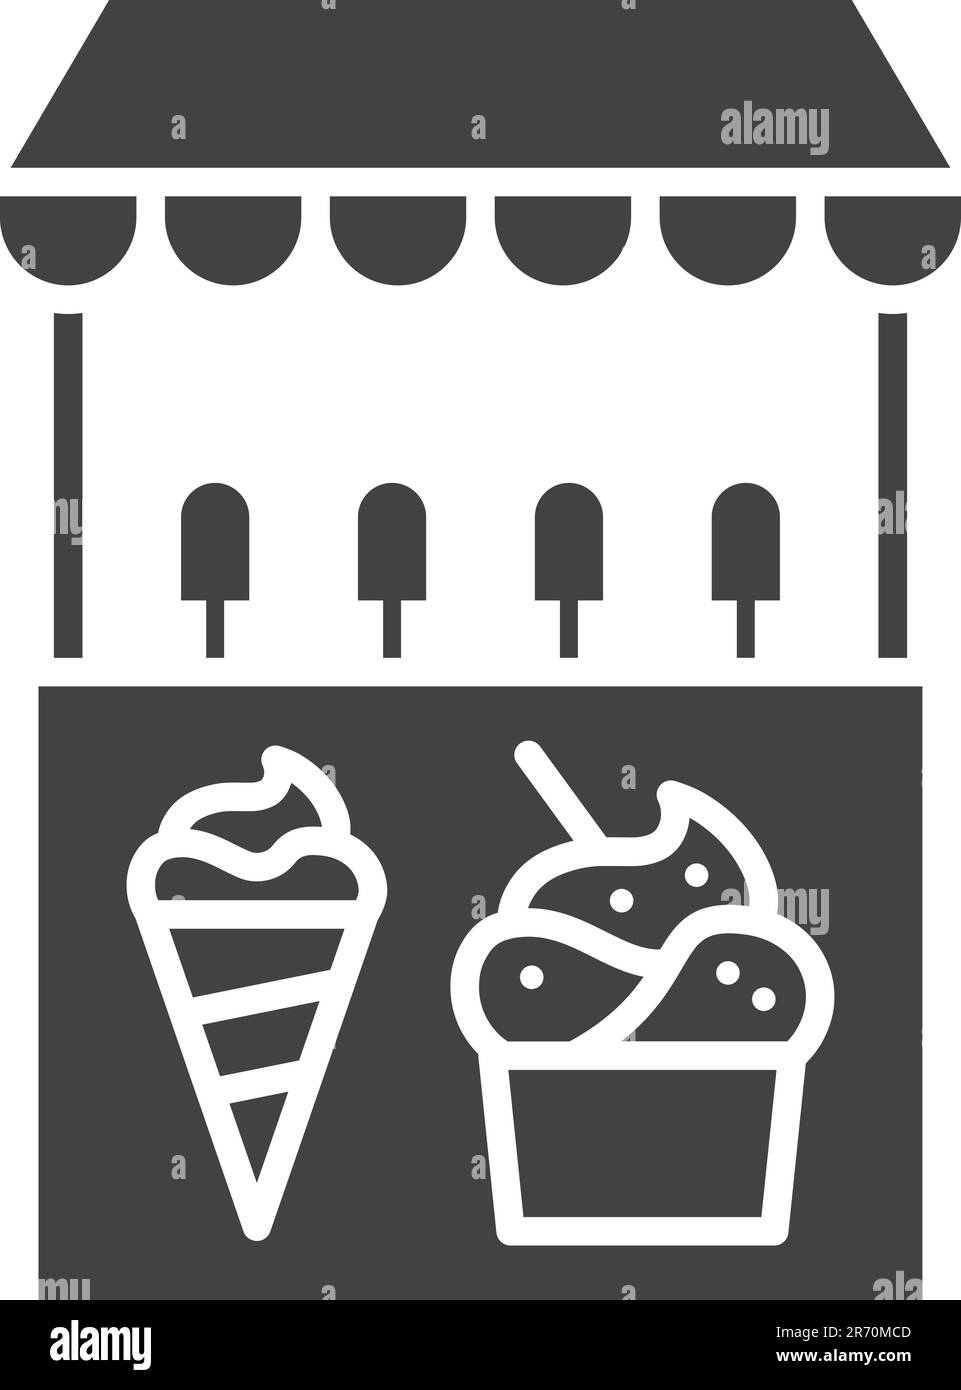 Ice cream shop Cut Out Stock Images & Pictures - Alamy